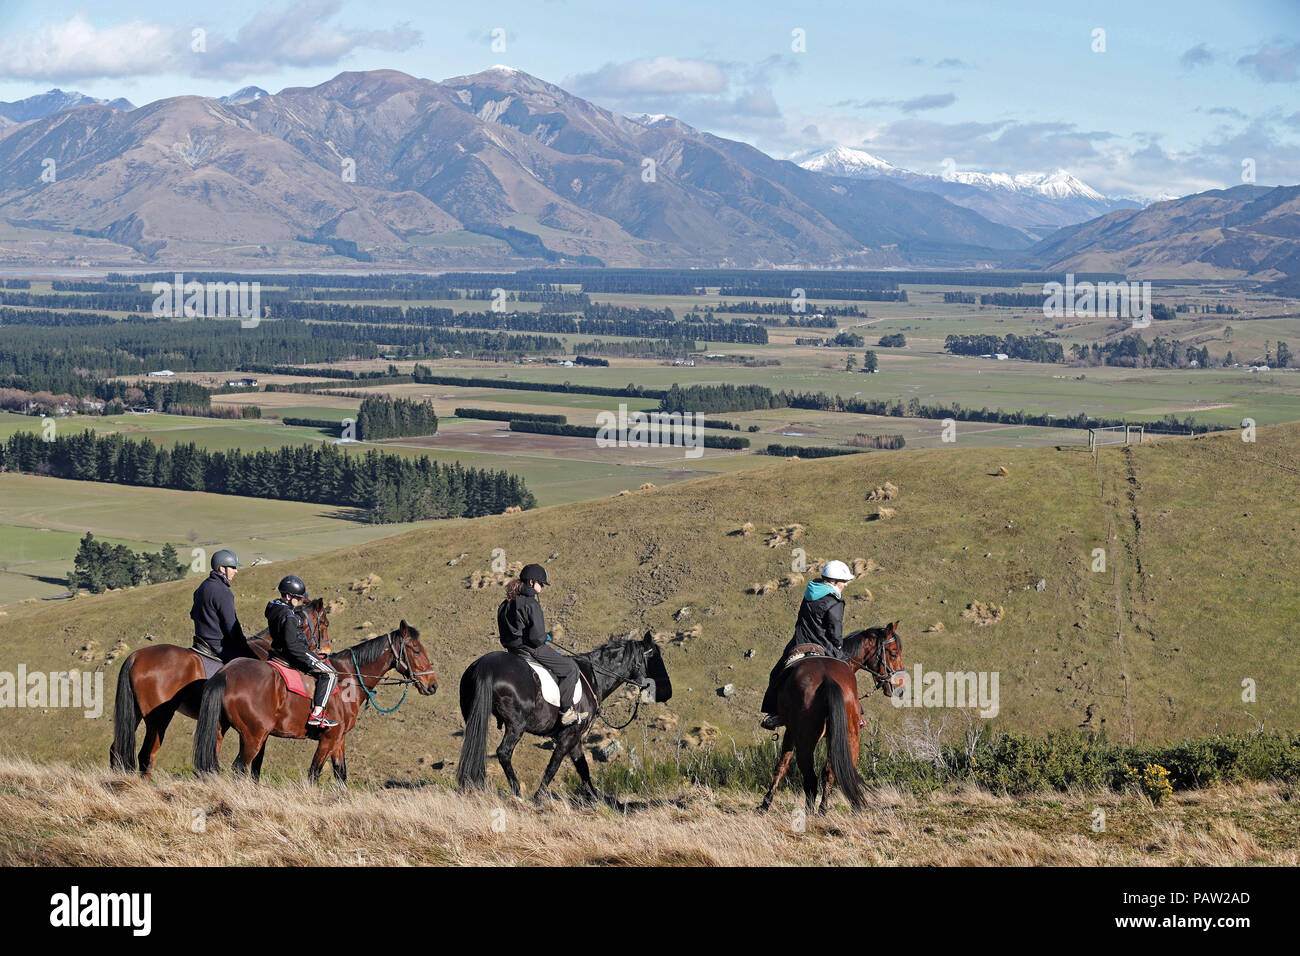 Picture by Tim Cuff - 17 July 2018 - Travel feature on the thermal spa resort of Hanmer Springs, Hurunui District, New Zealand: horse trekking with th Stock Photo